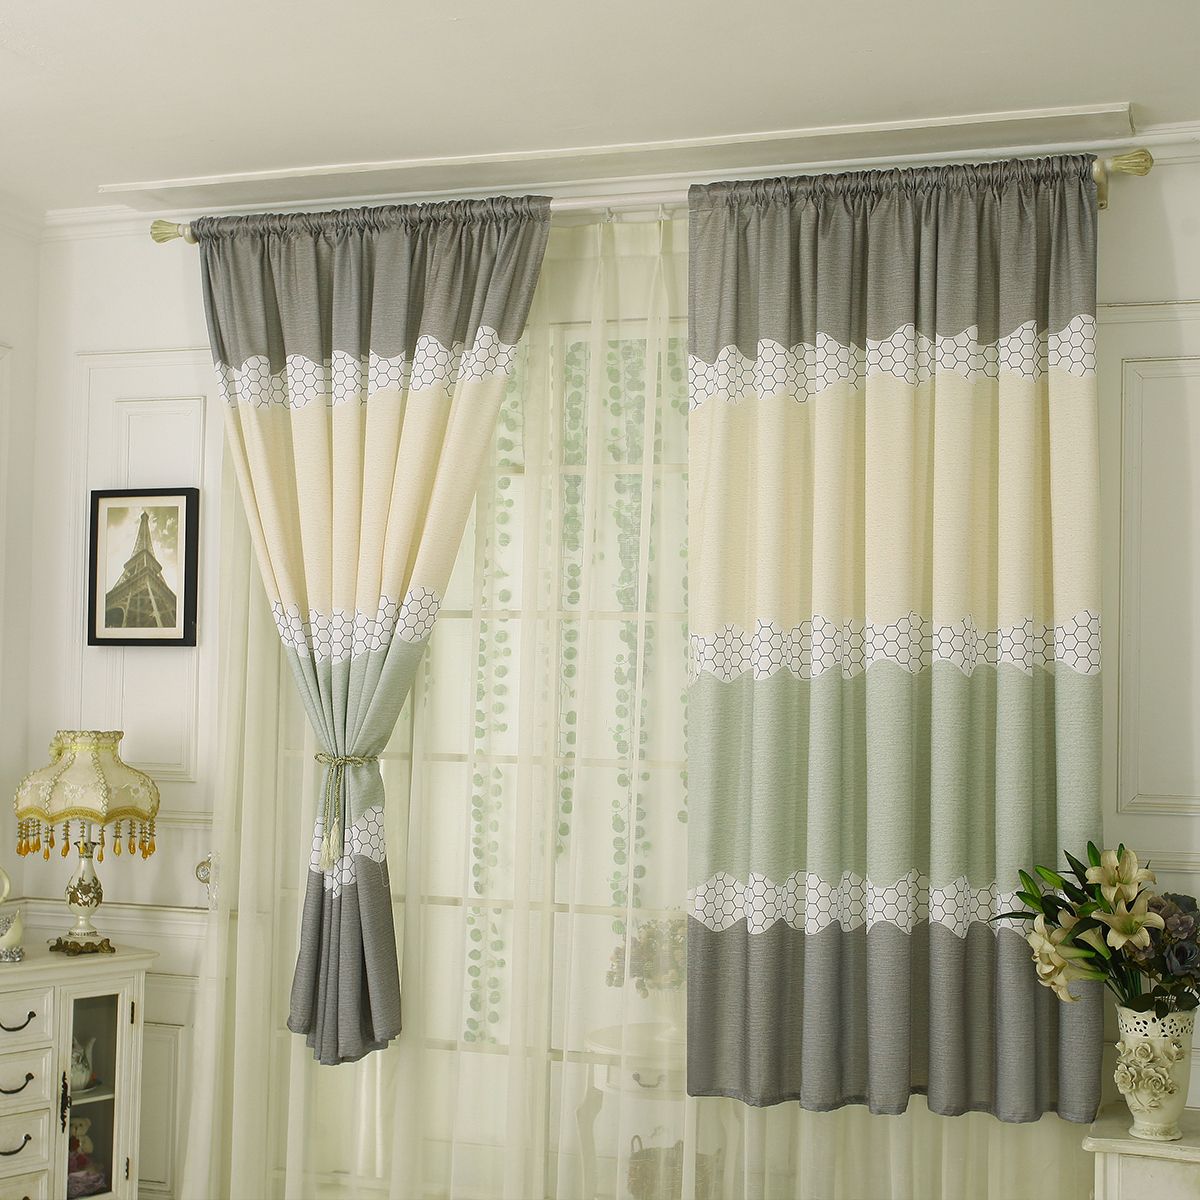 Details About Thermal Pencil Pleat Blackout Window Curtain Panel Rod Pocket  Net Slot Top Tape Pertaining To Willow Rod Pocket Window Curtain Panels (View 30 of 30)